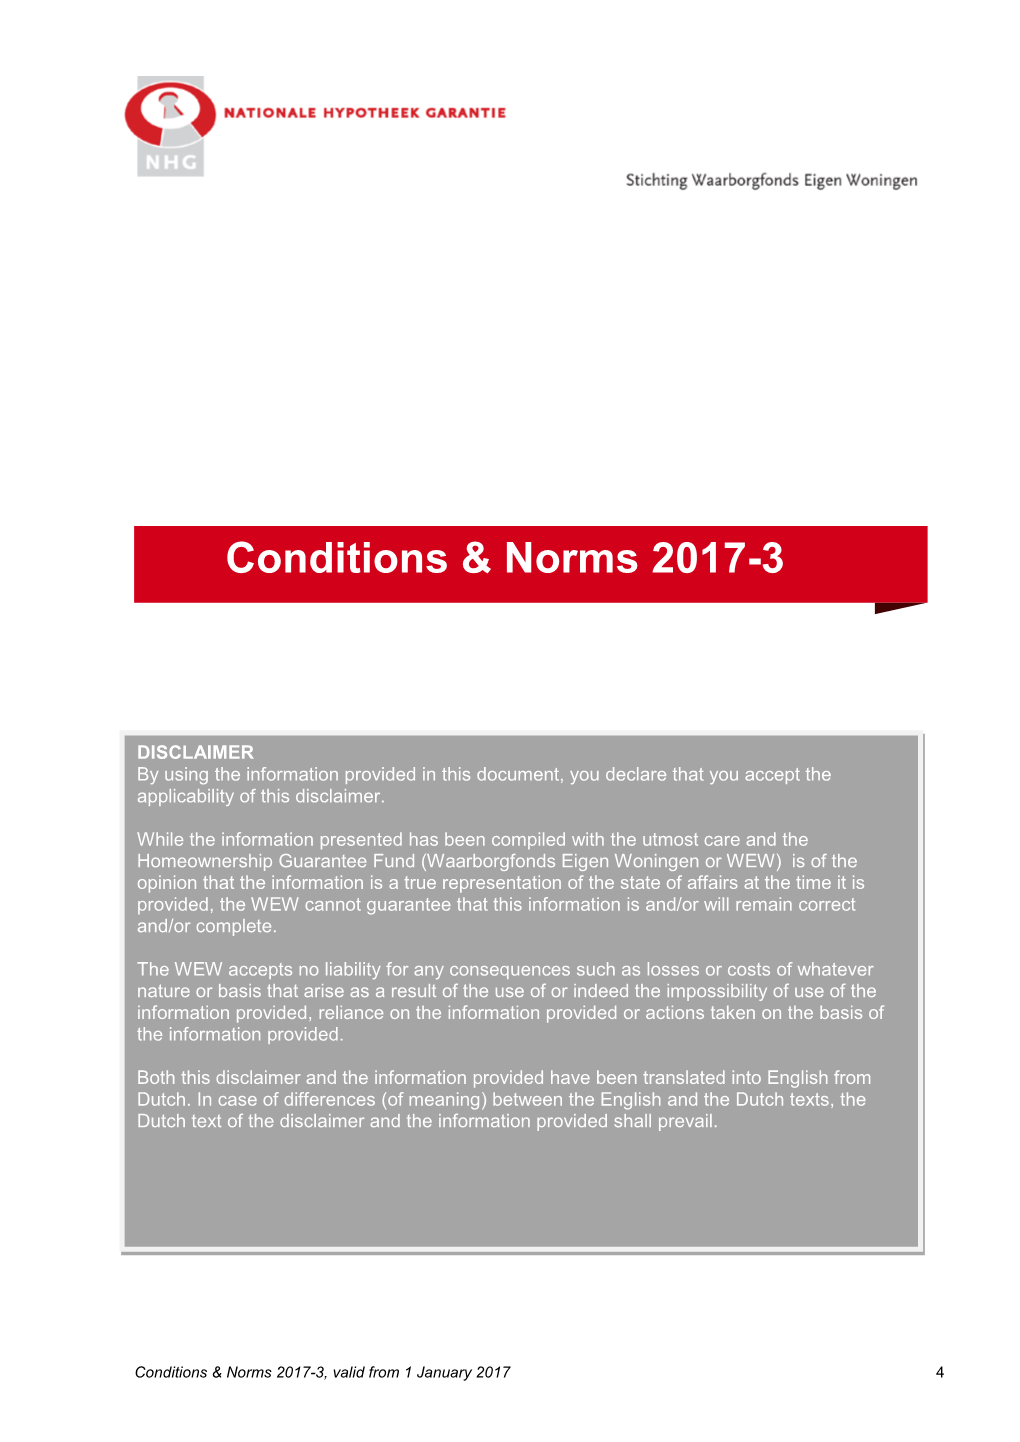 Conditions & Norms 2017-3